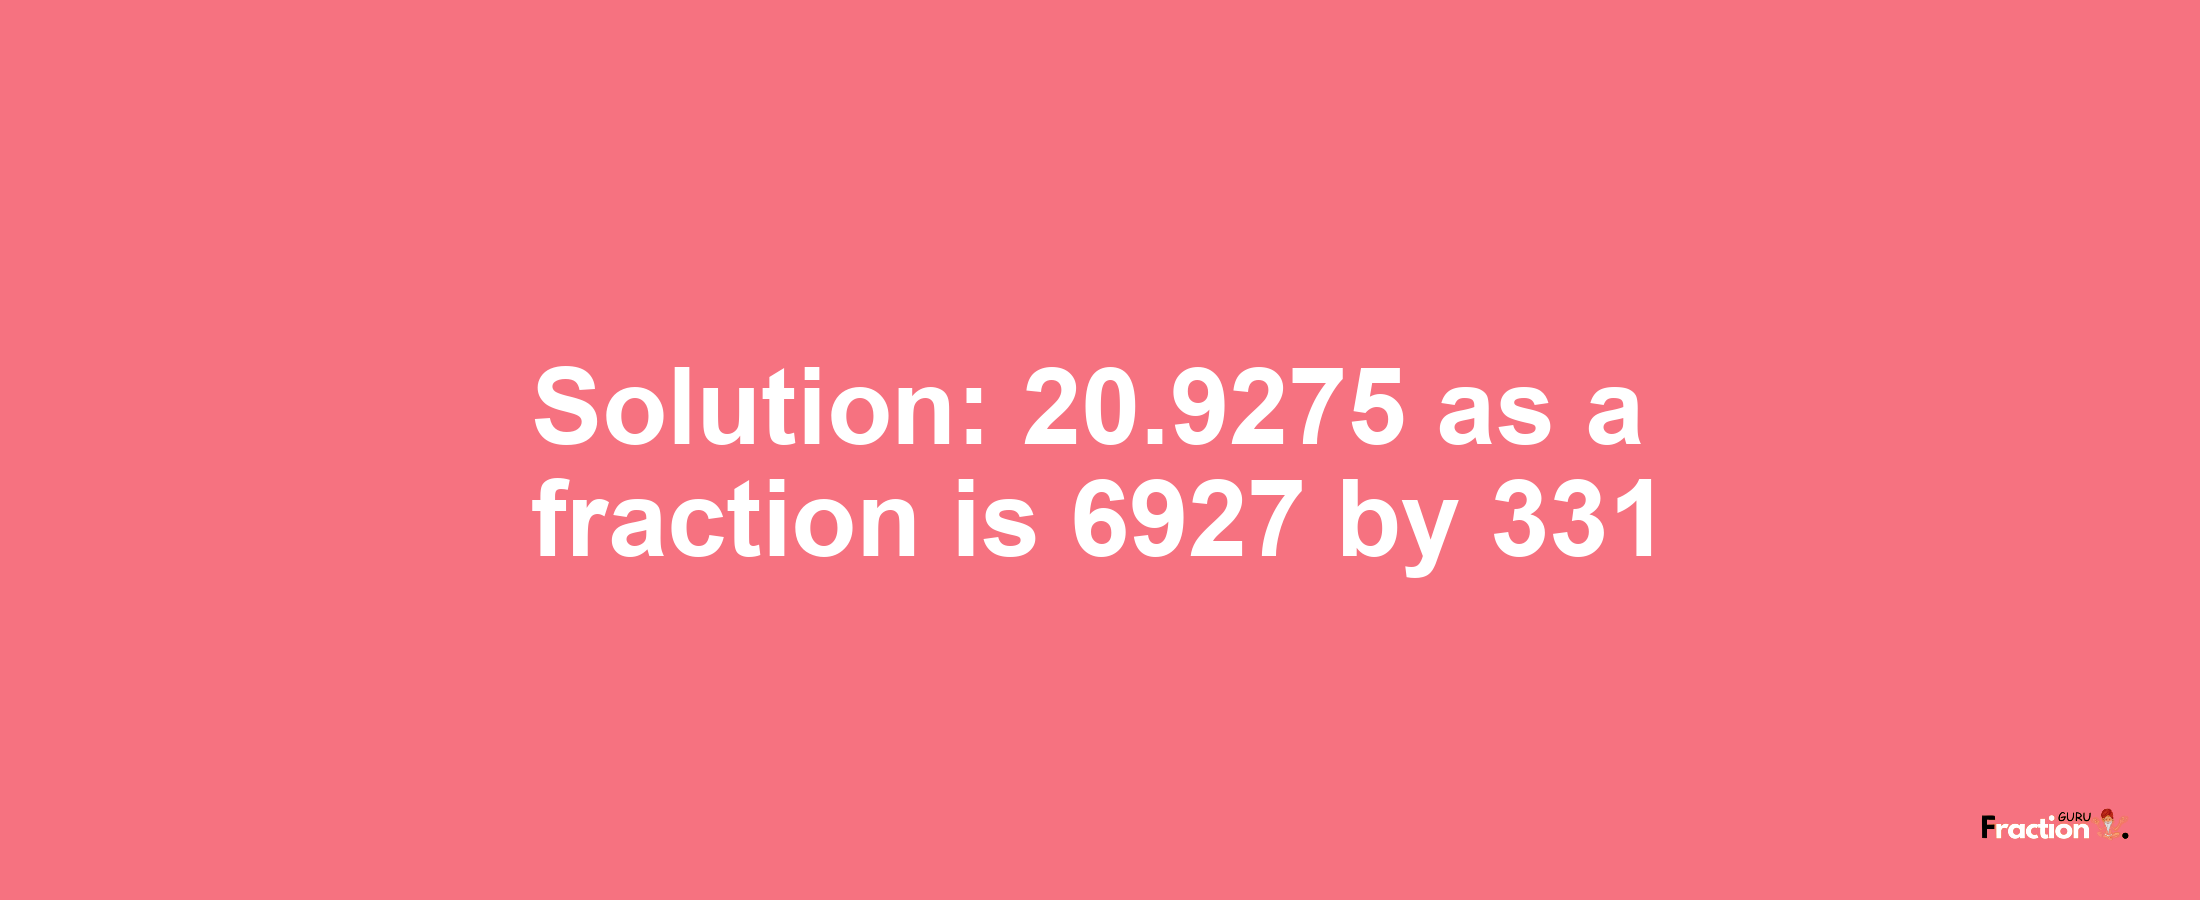 Solution:20.9275 as a fraction is 6927/331